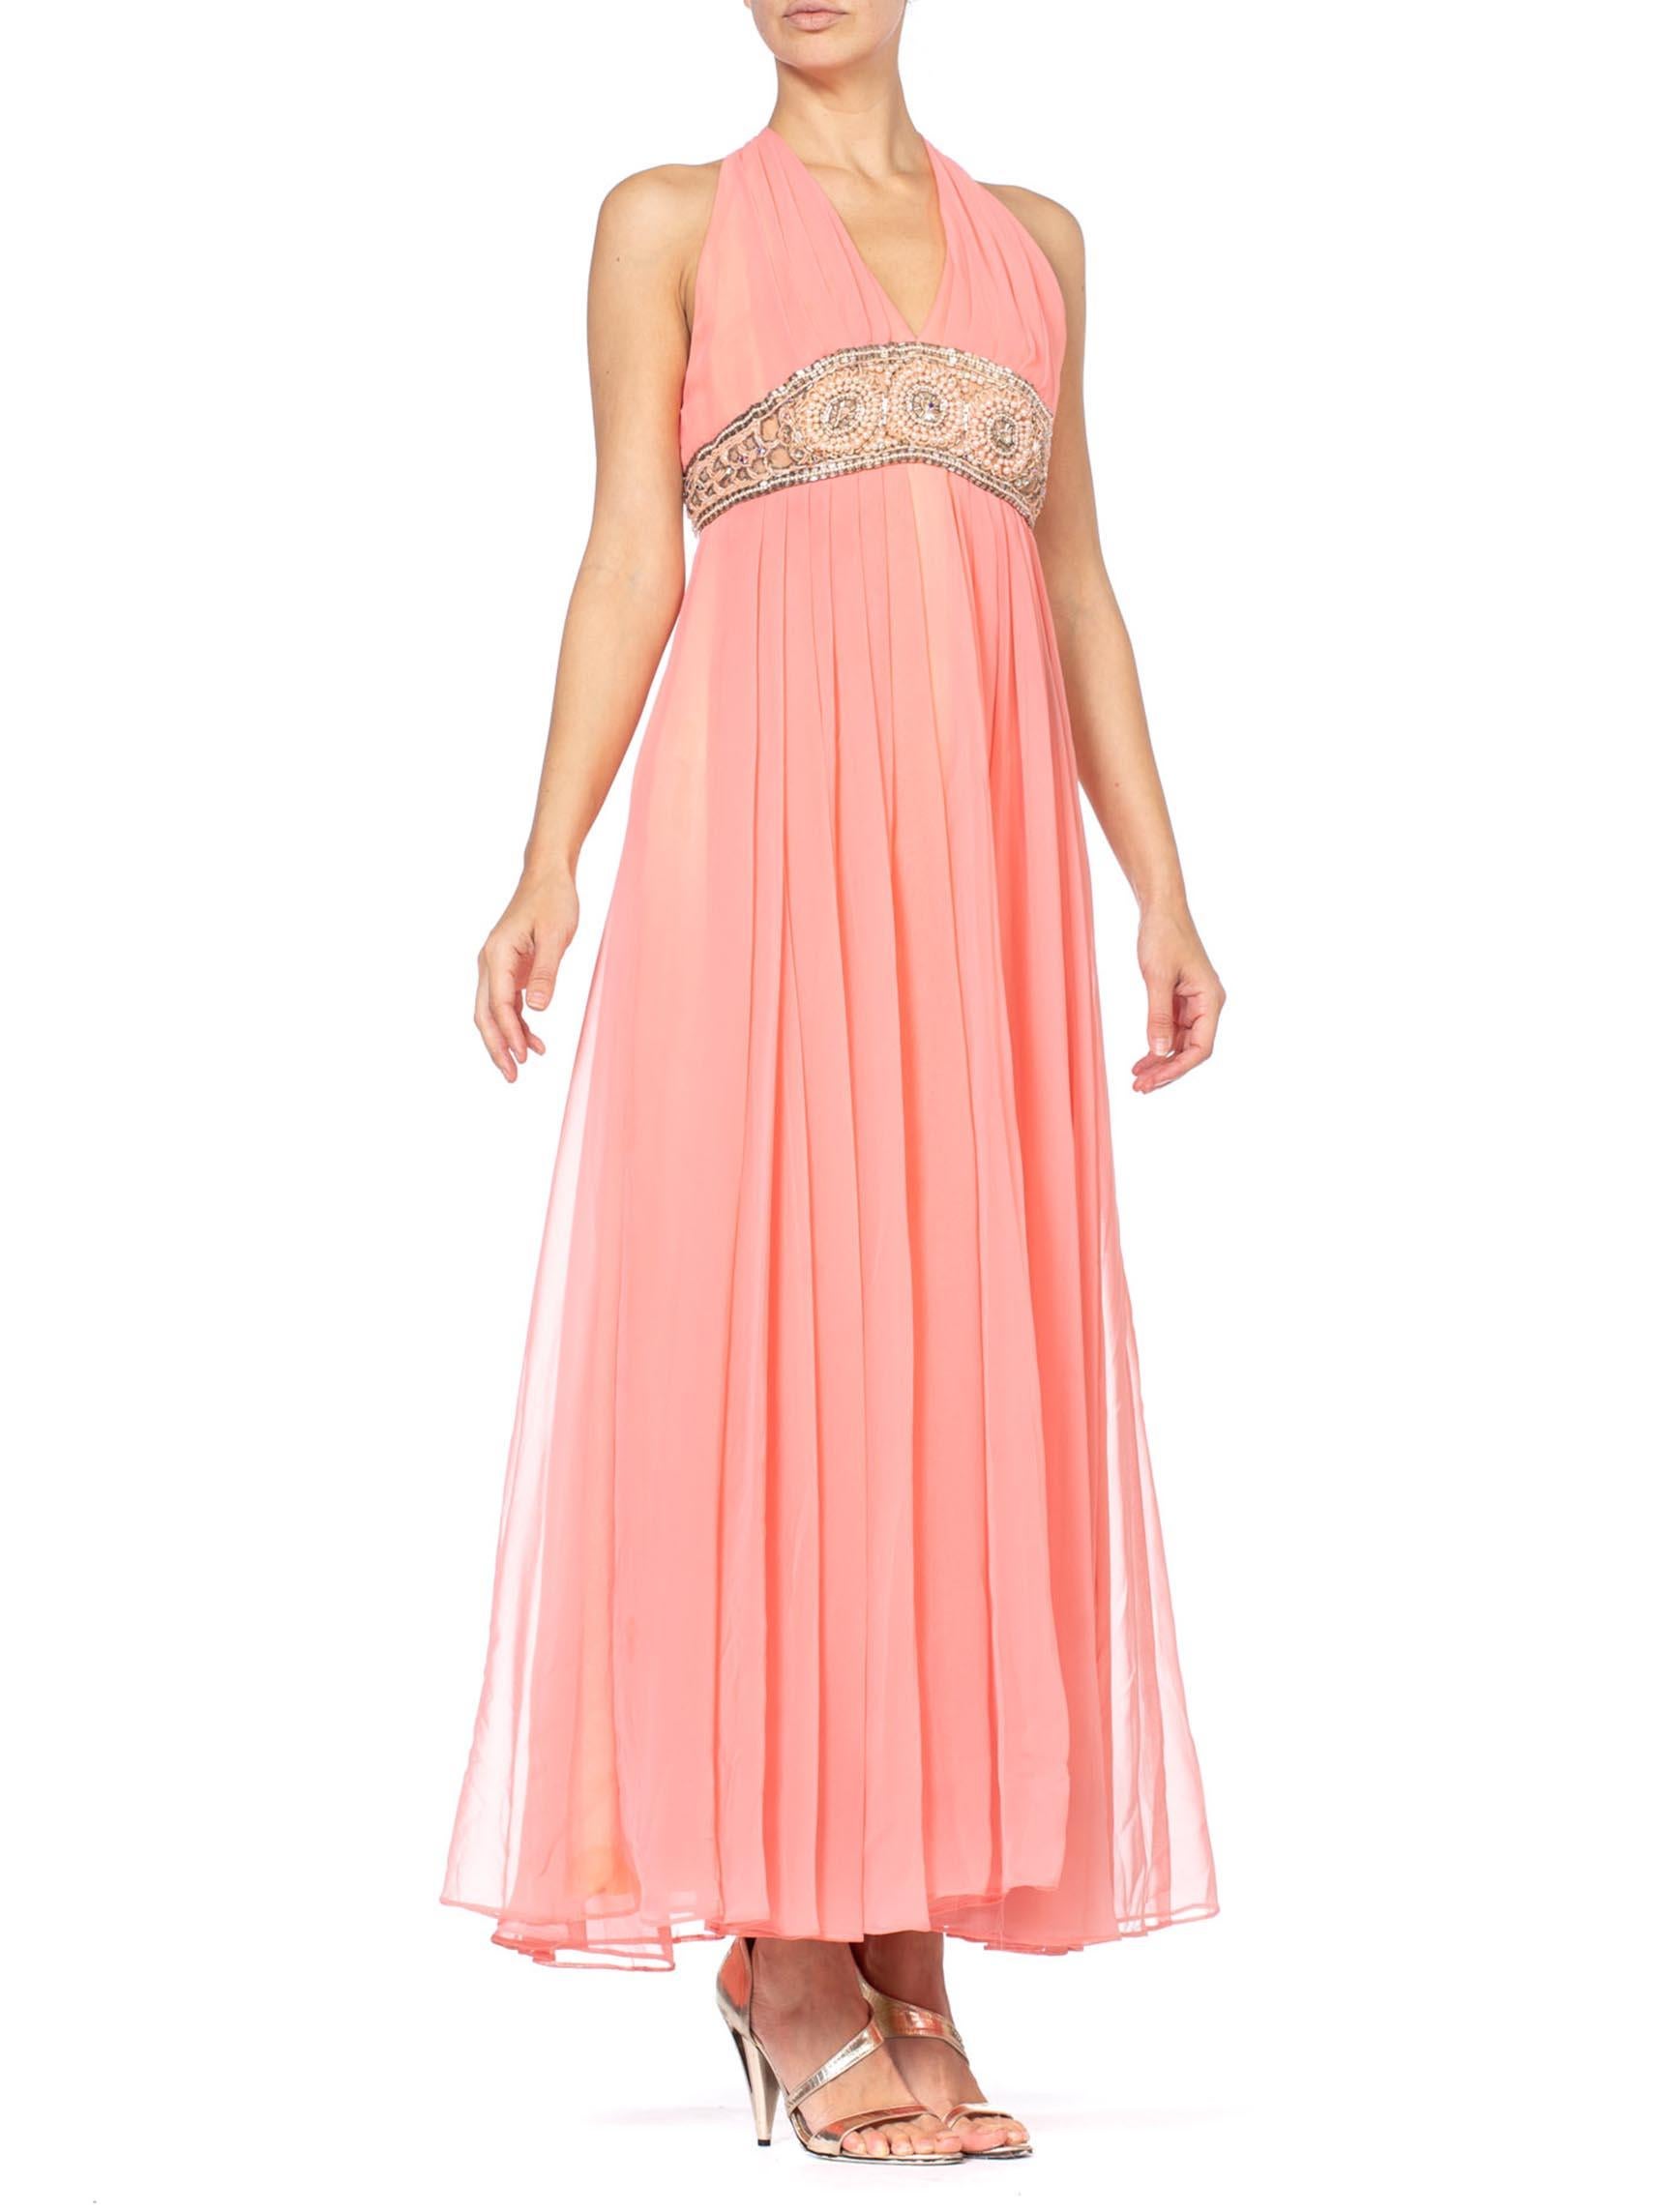 1970S Salmon Pink Polyester Chiffon Empire Waist Godess Gown With Crystal Beading